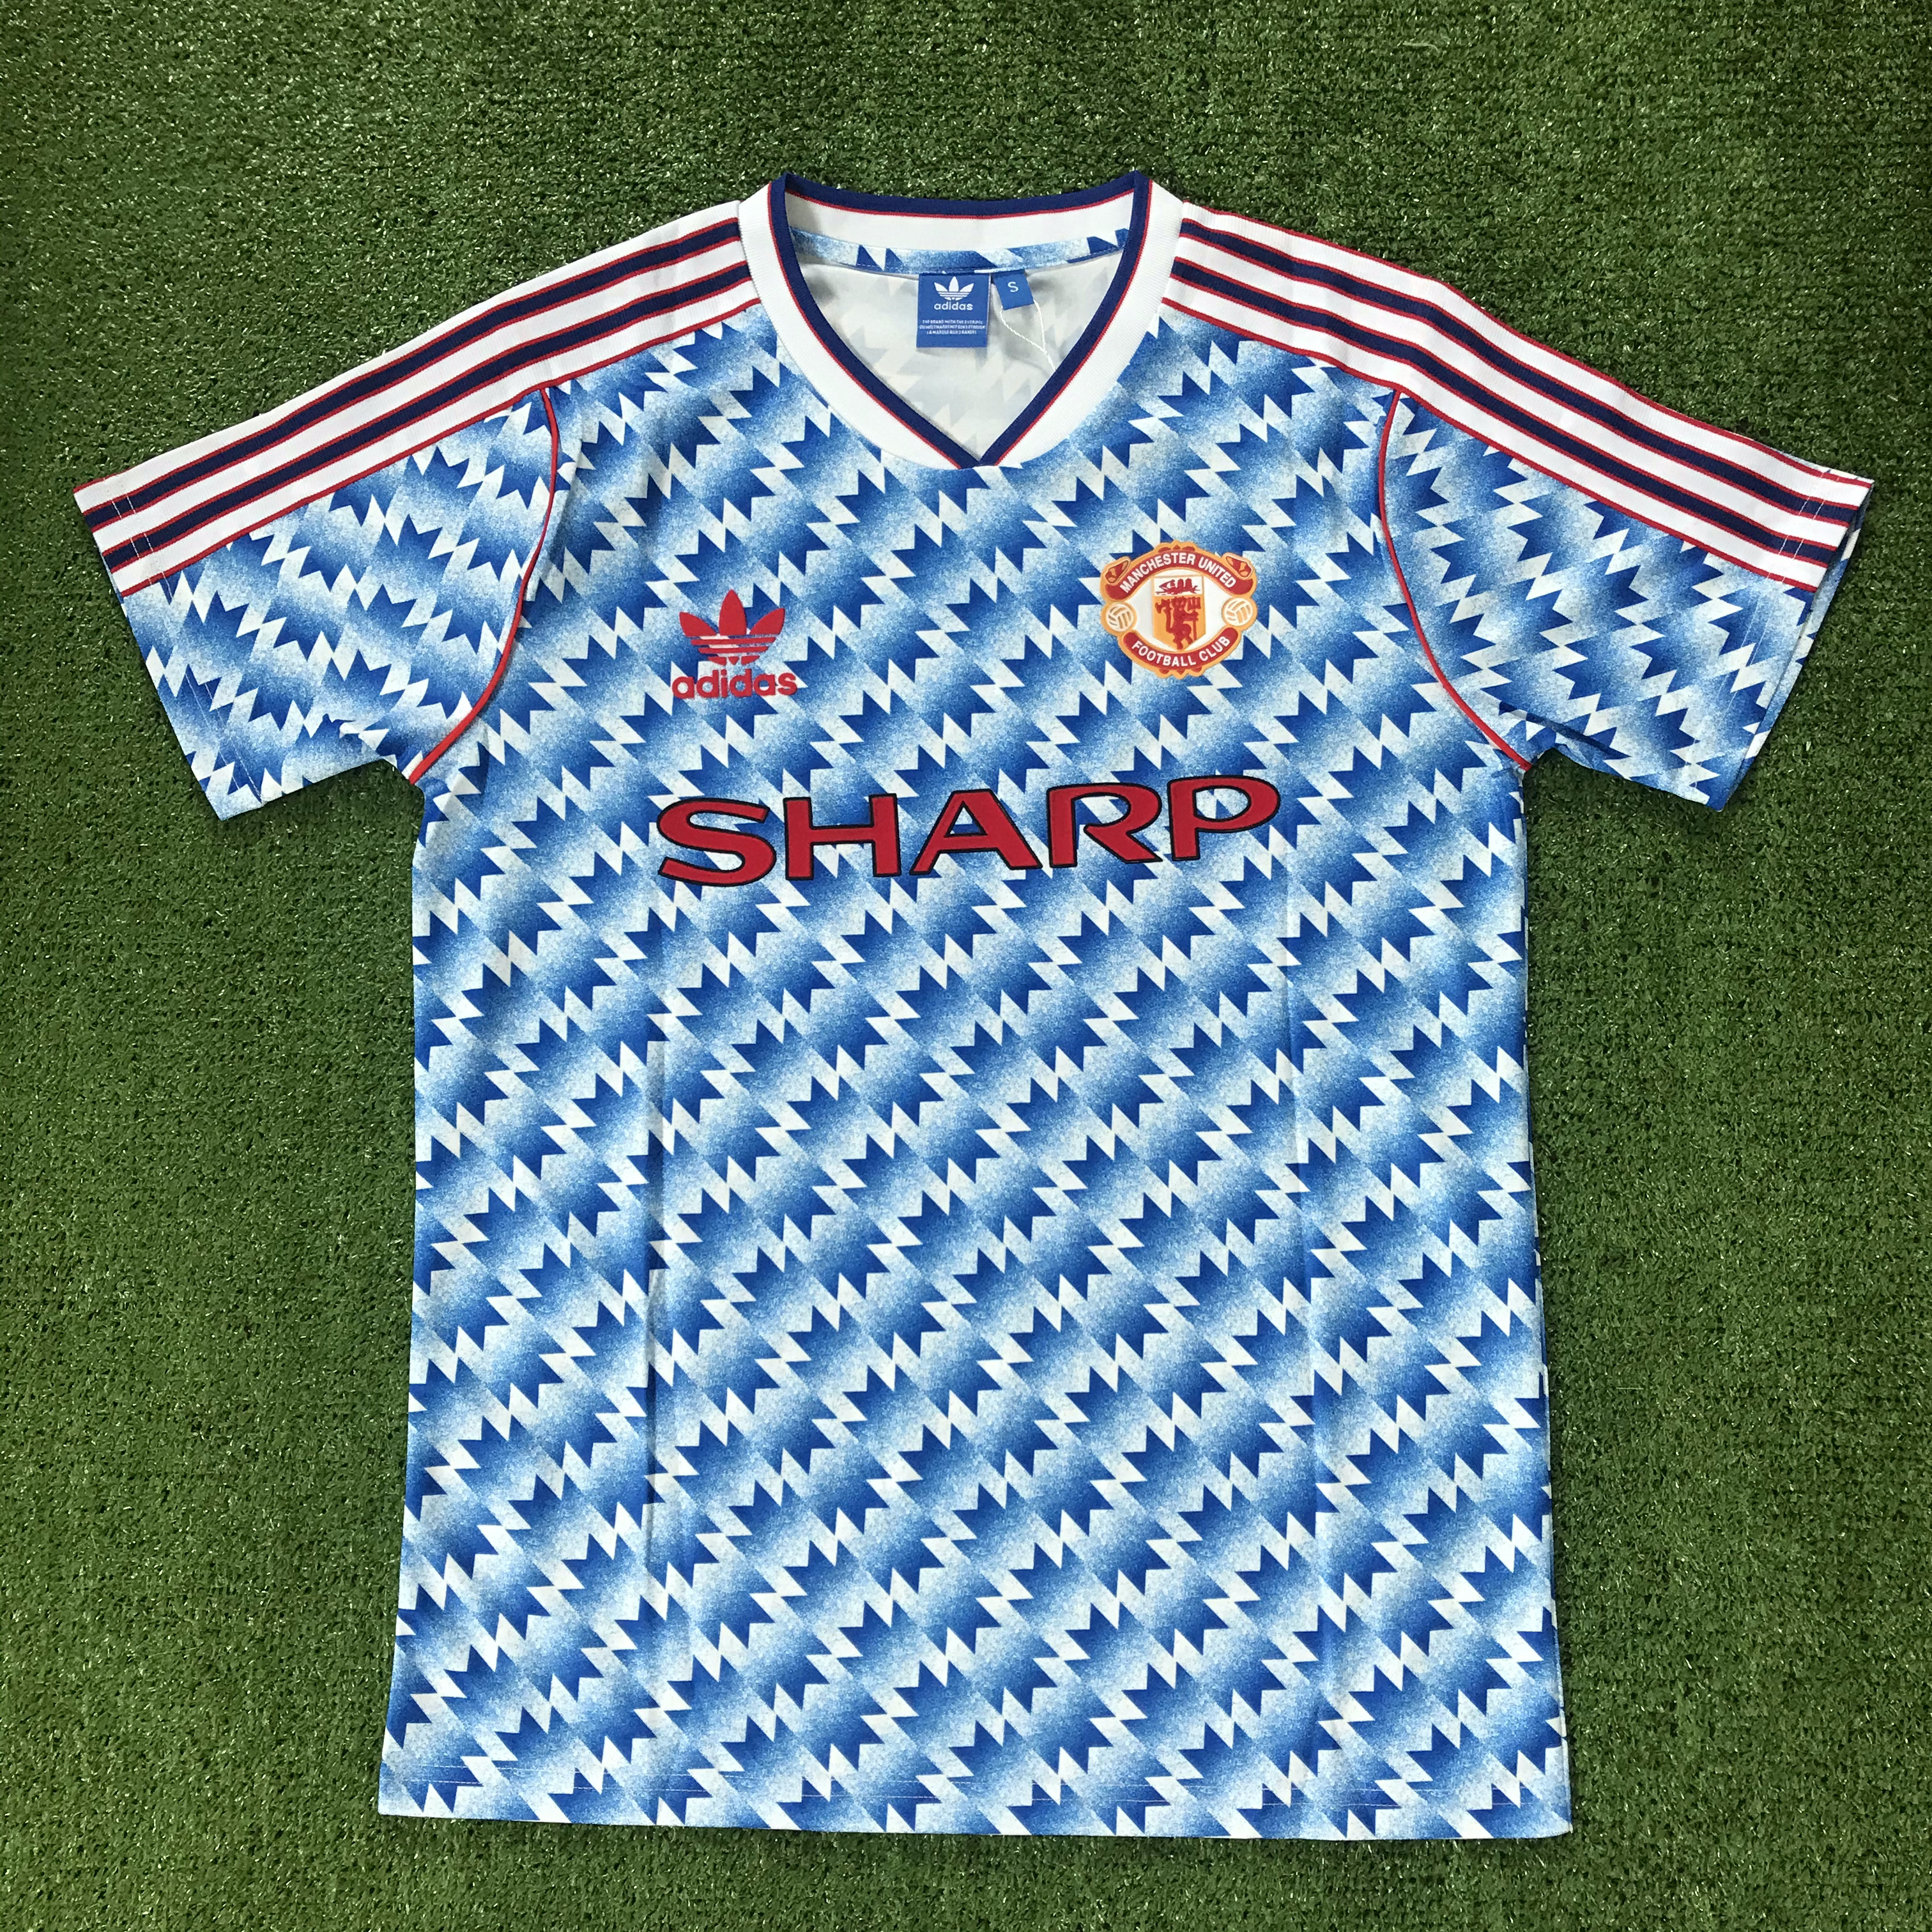 MANCHESTER UNITED 1990/1992 AWAY FOOTBALL SHIRT AUTHENTIC SOCCER